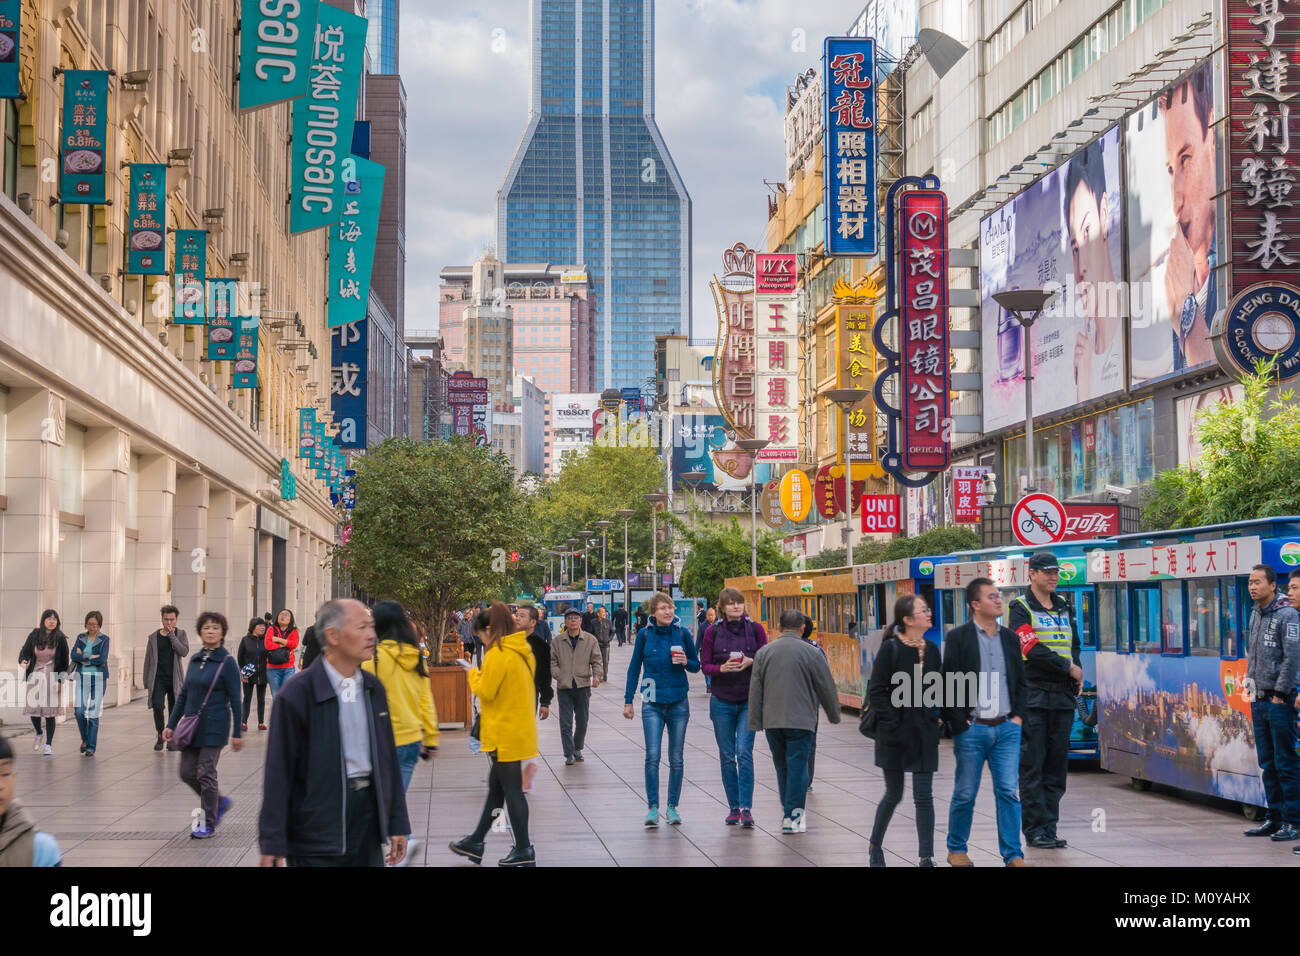 People visiting the Nanjing Road shopping street in Shanghai Stock Photo